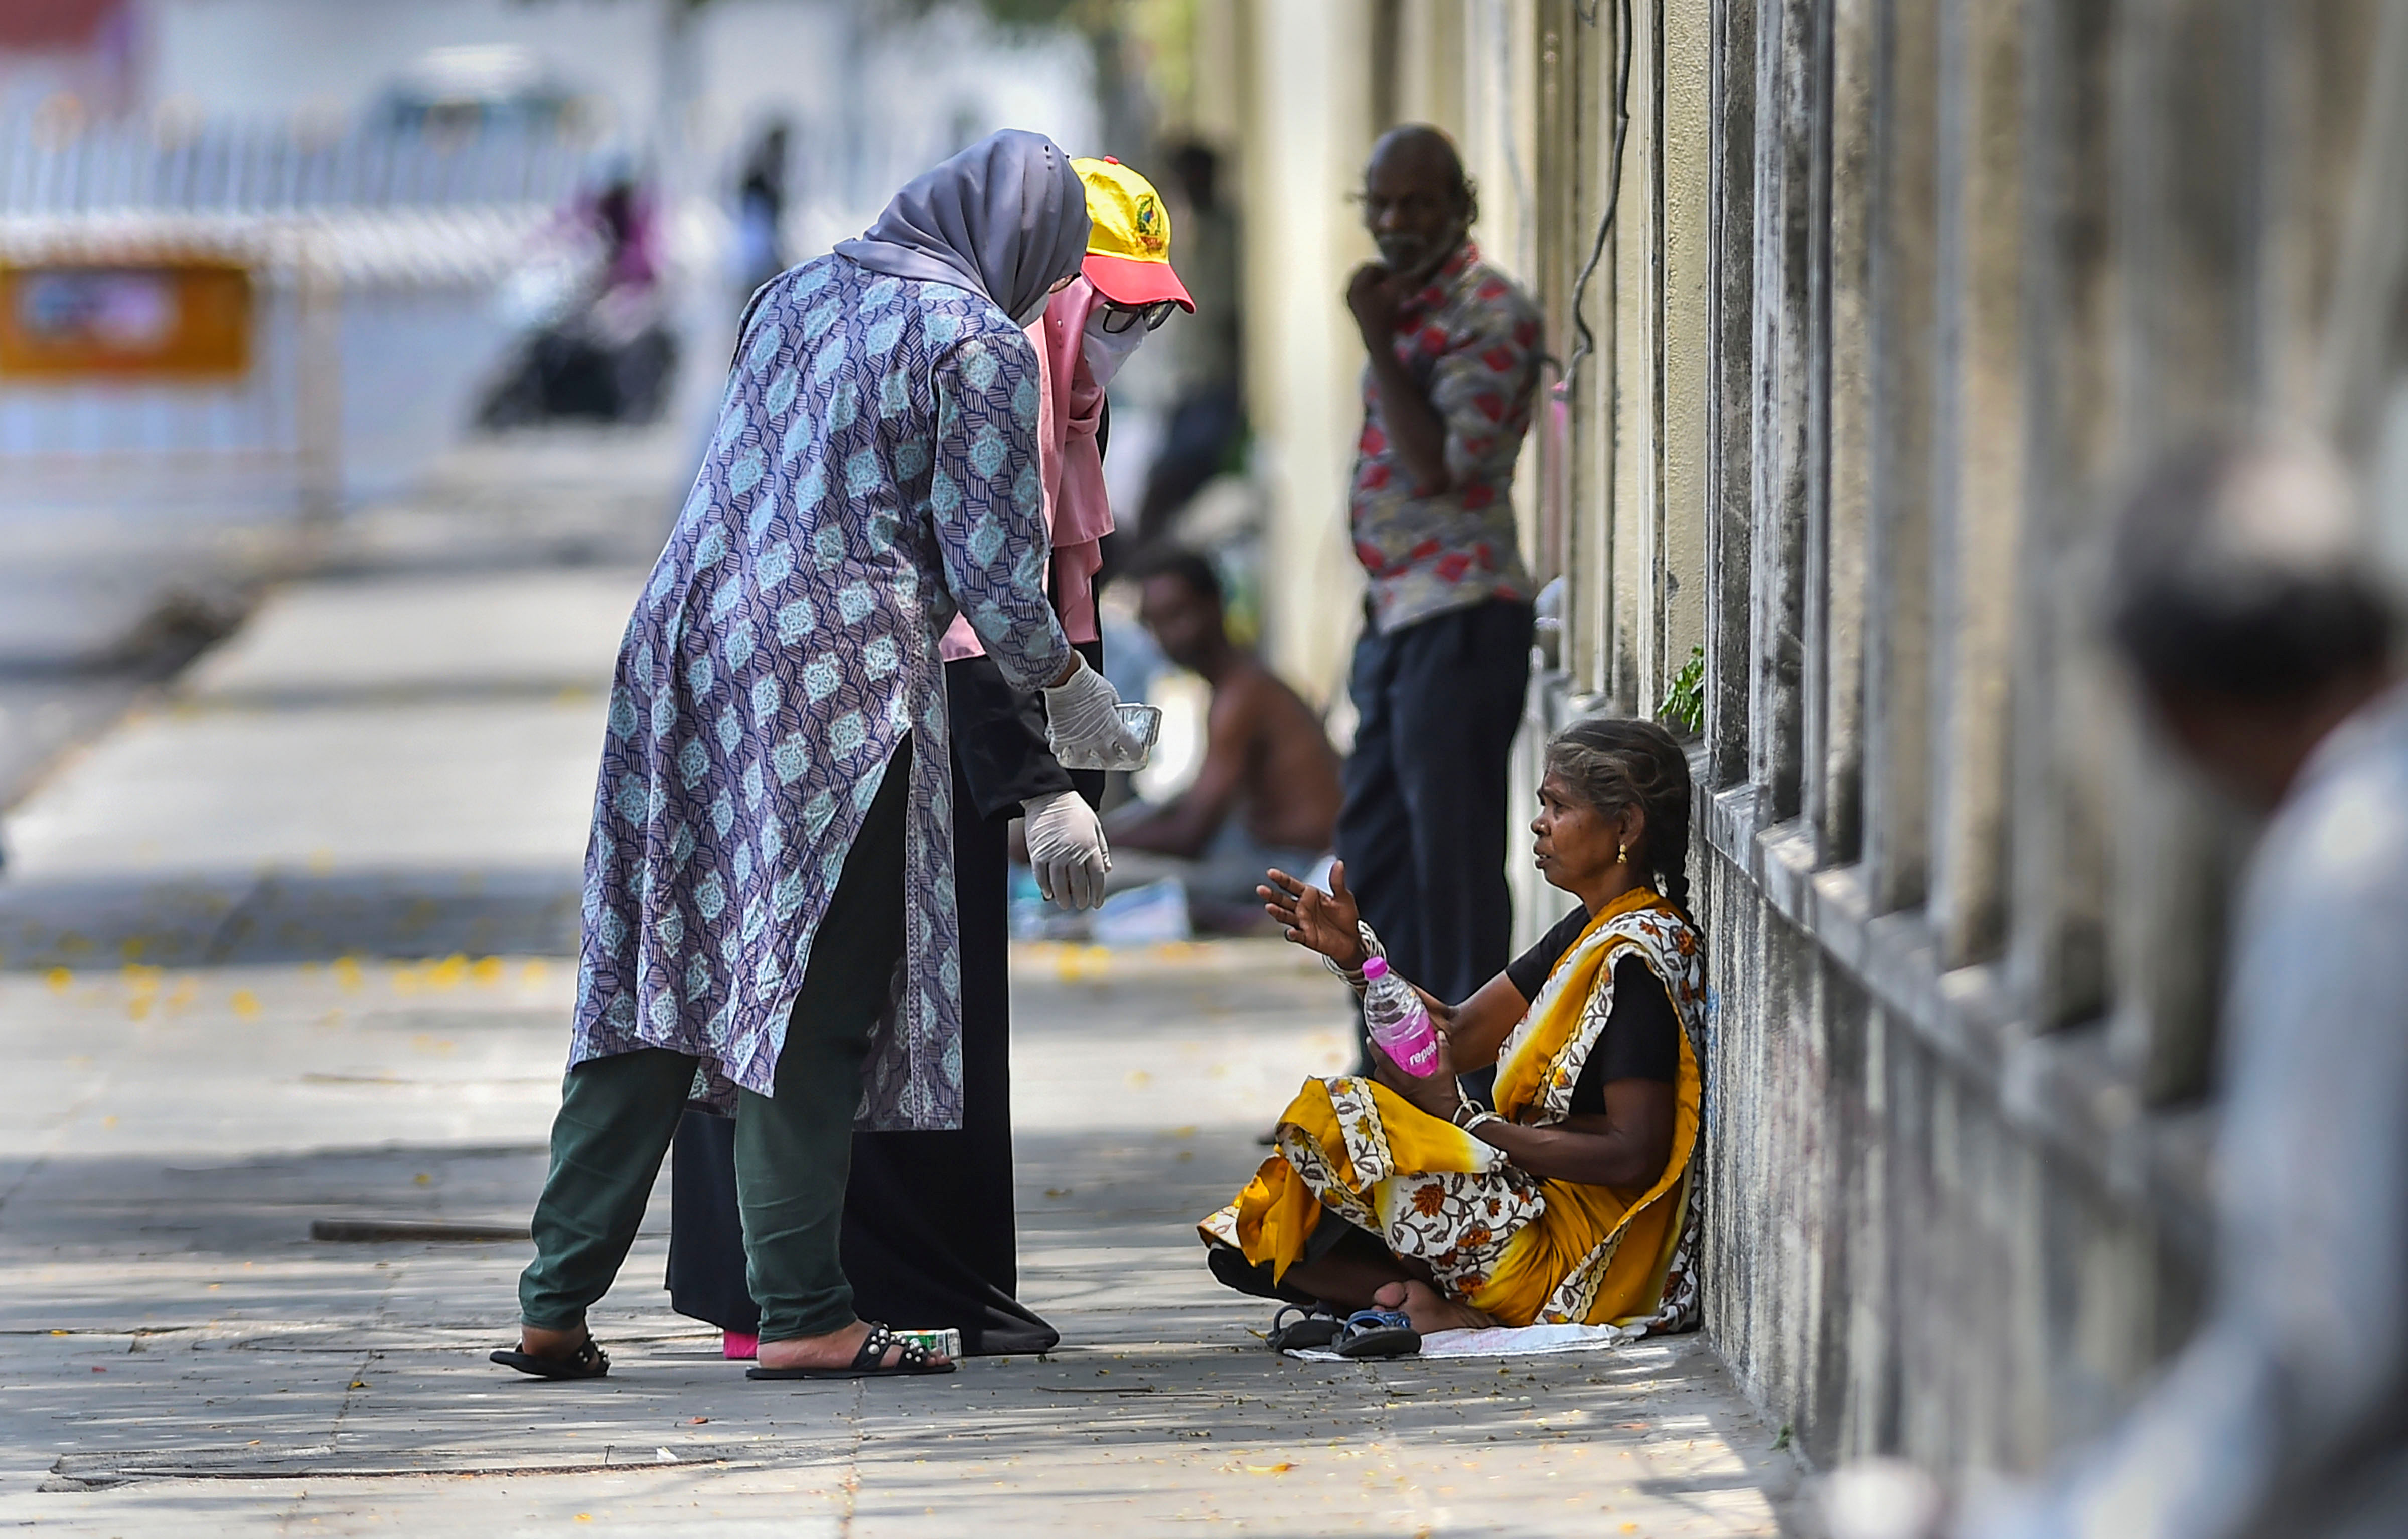 Two women offer food to a poor woman during the nationwide lockdown imposed to contain the spread of the COVID-19. (PTI Photo)